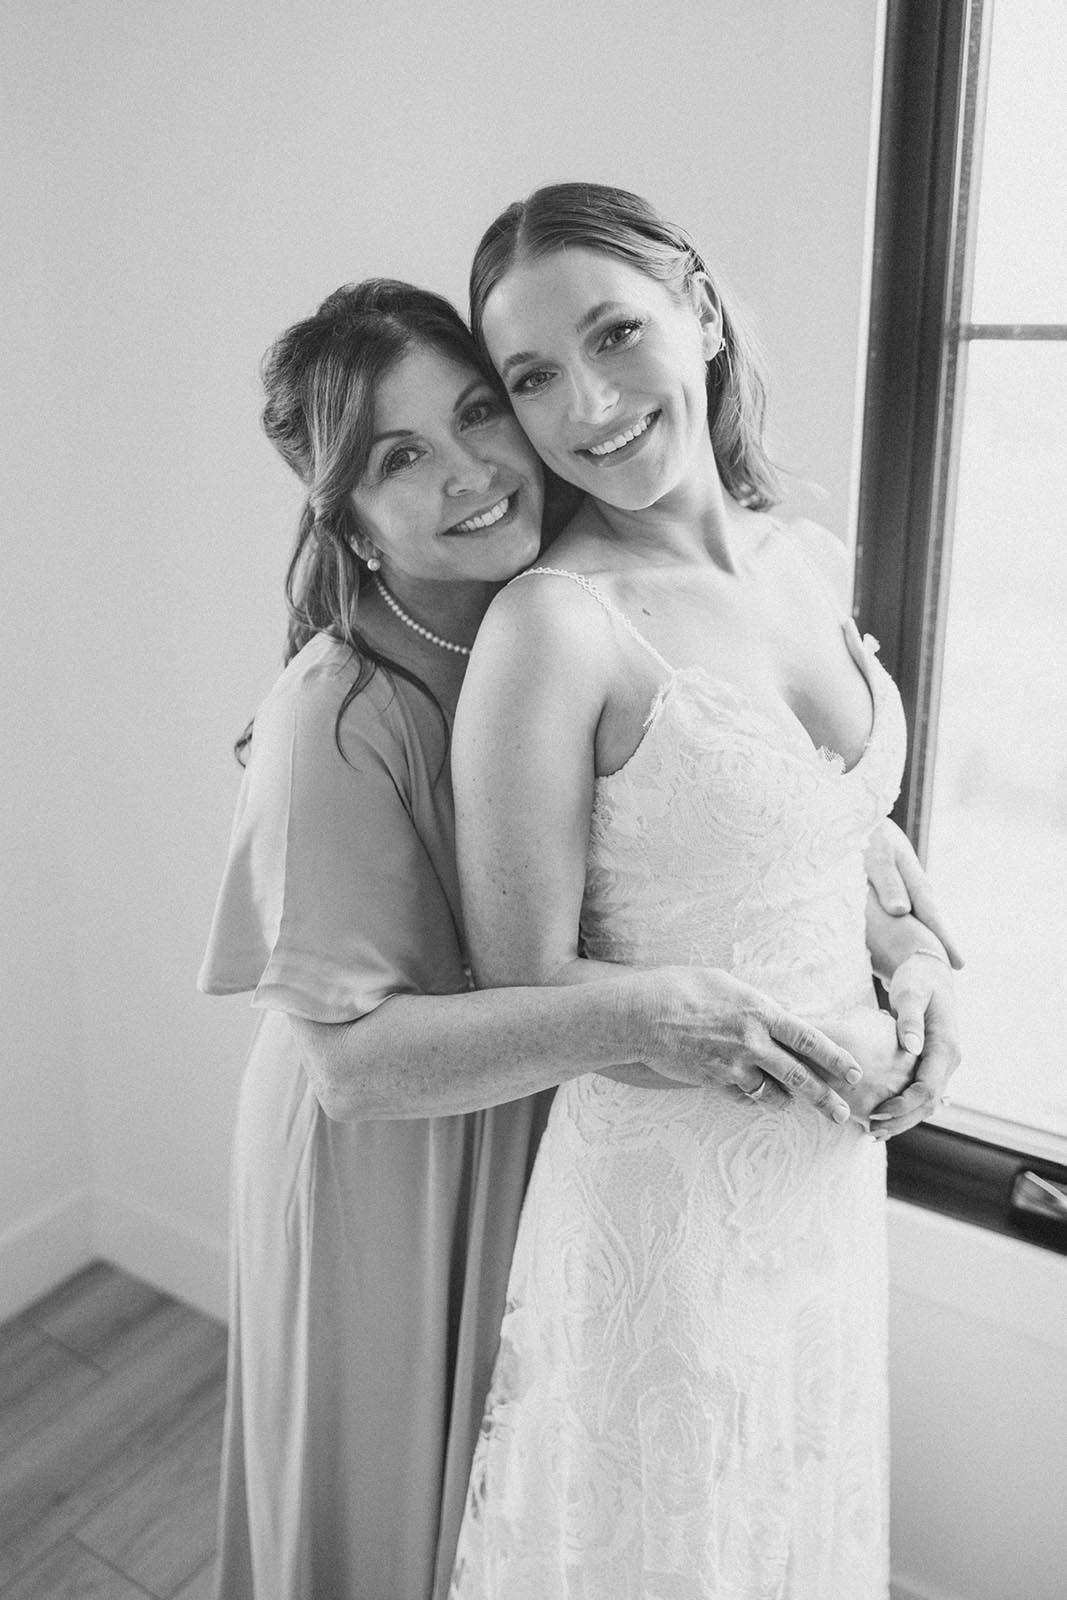 Mum, touching the bride's belly